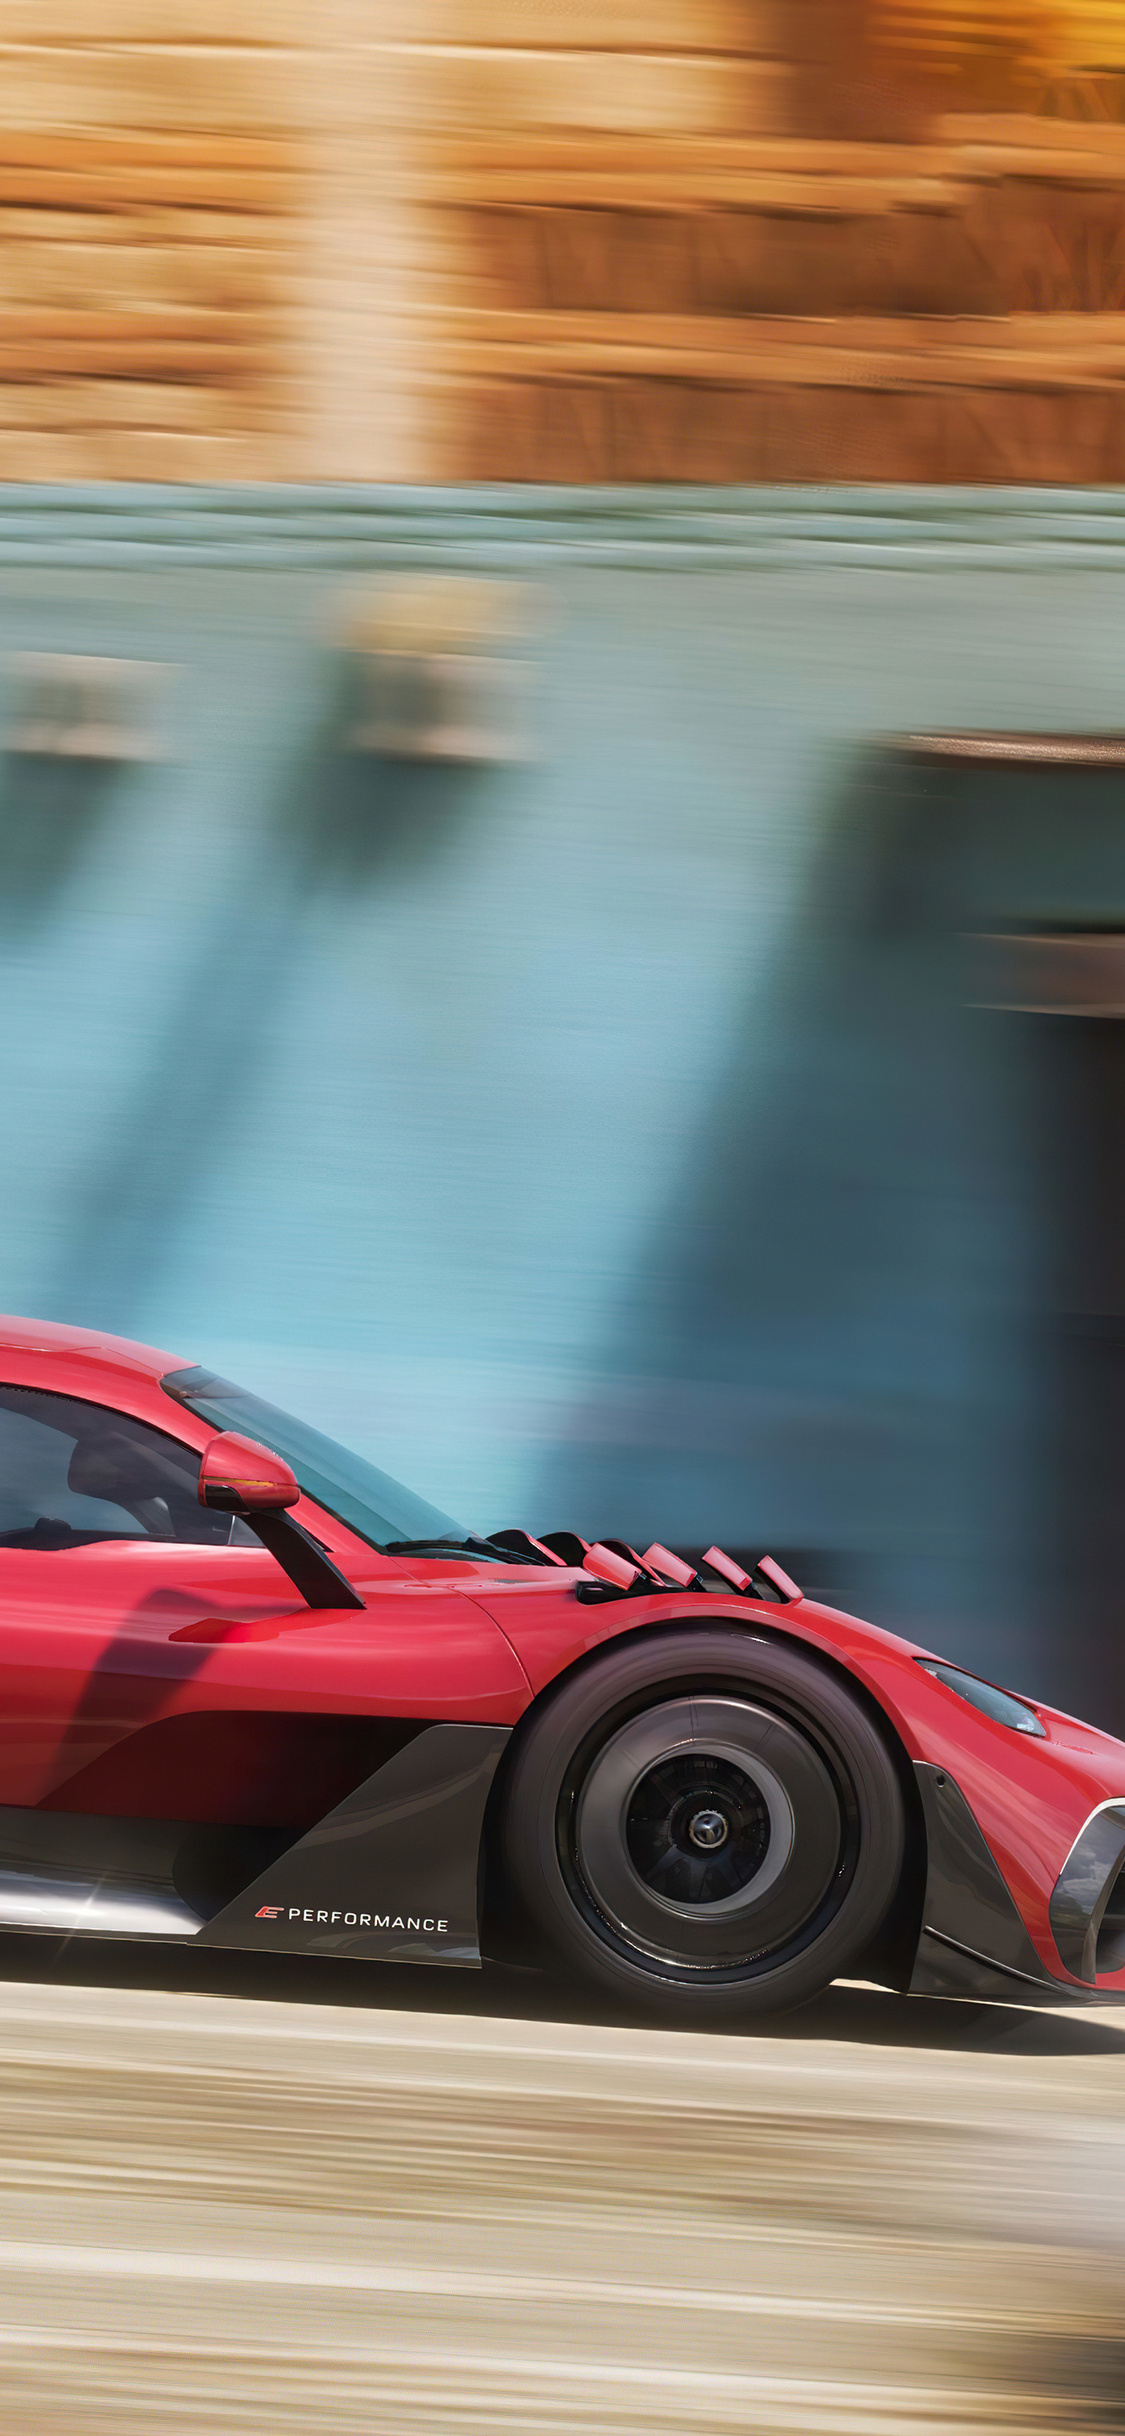 Forza Horizon 5 Wallpapers  Top 35 Best Forza Horizon 5 Backgrounds Images